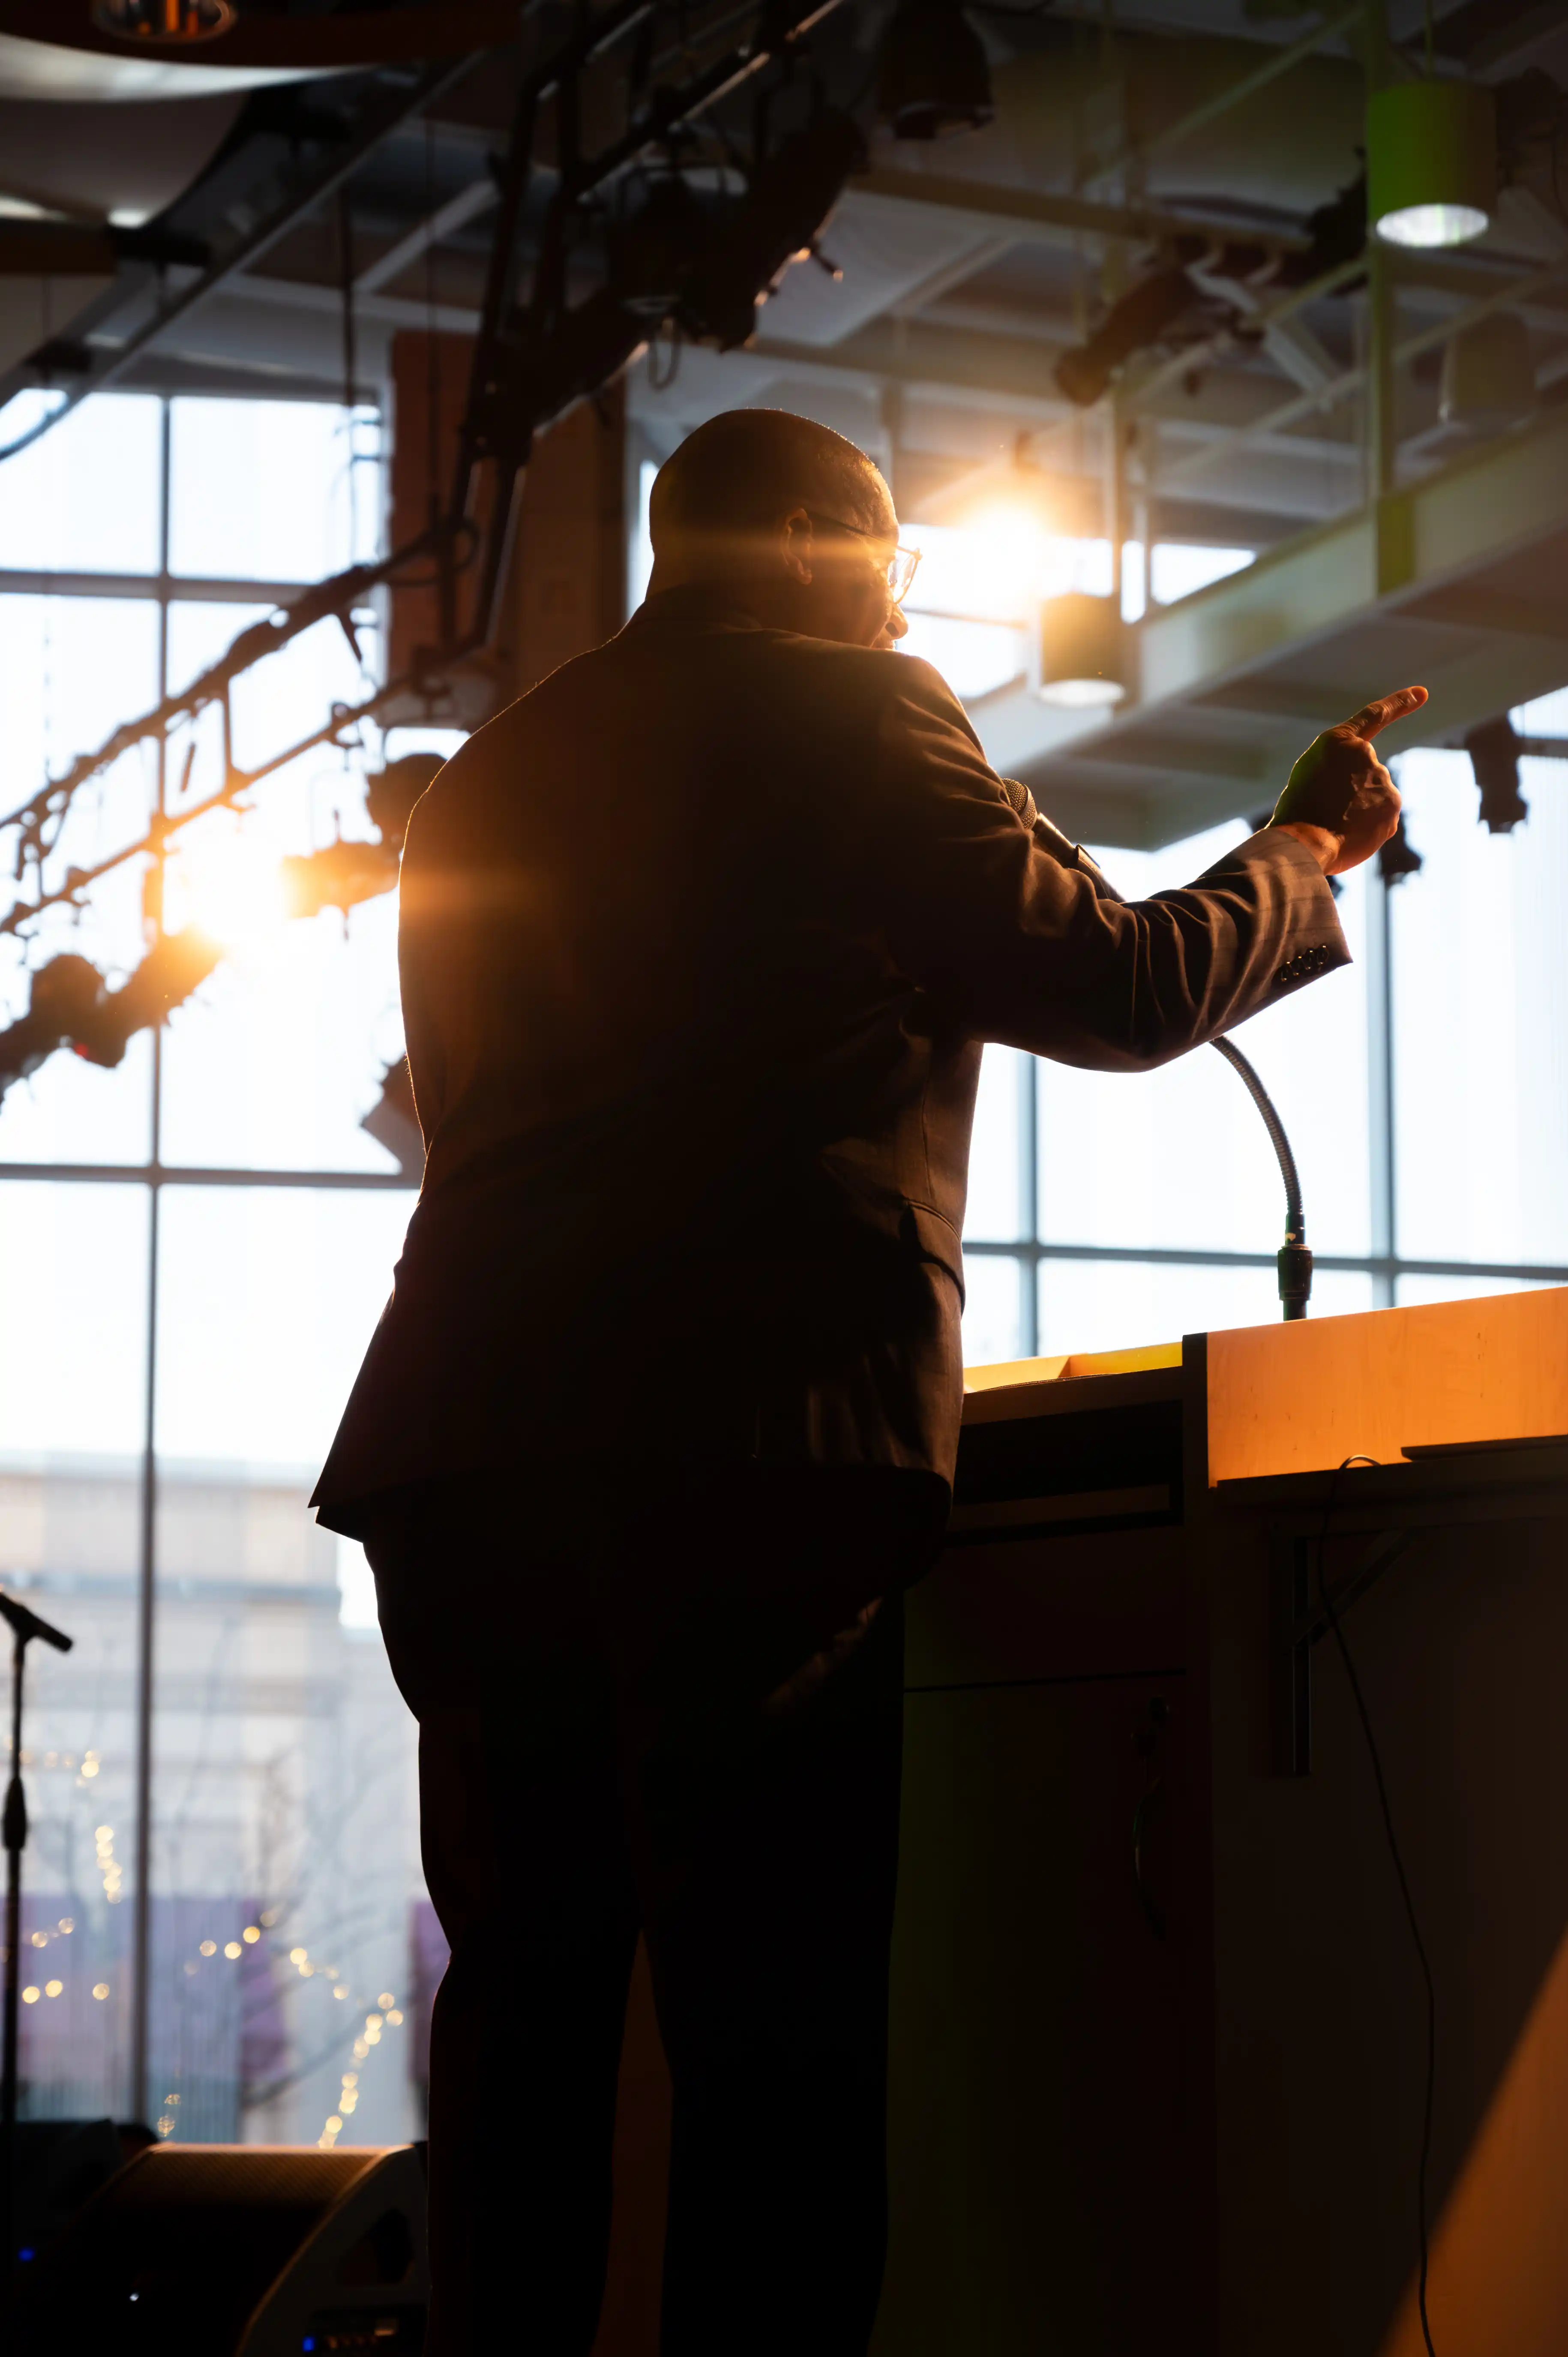 Silhouette of a person speaking at a podium with microphone in a room illuminated by natural light from windows.